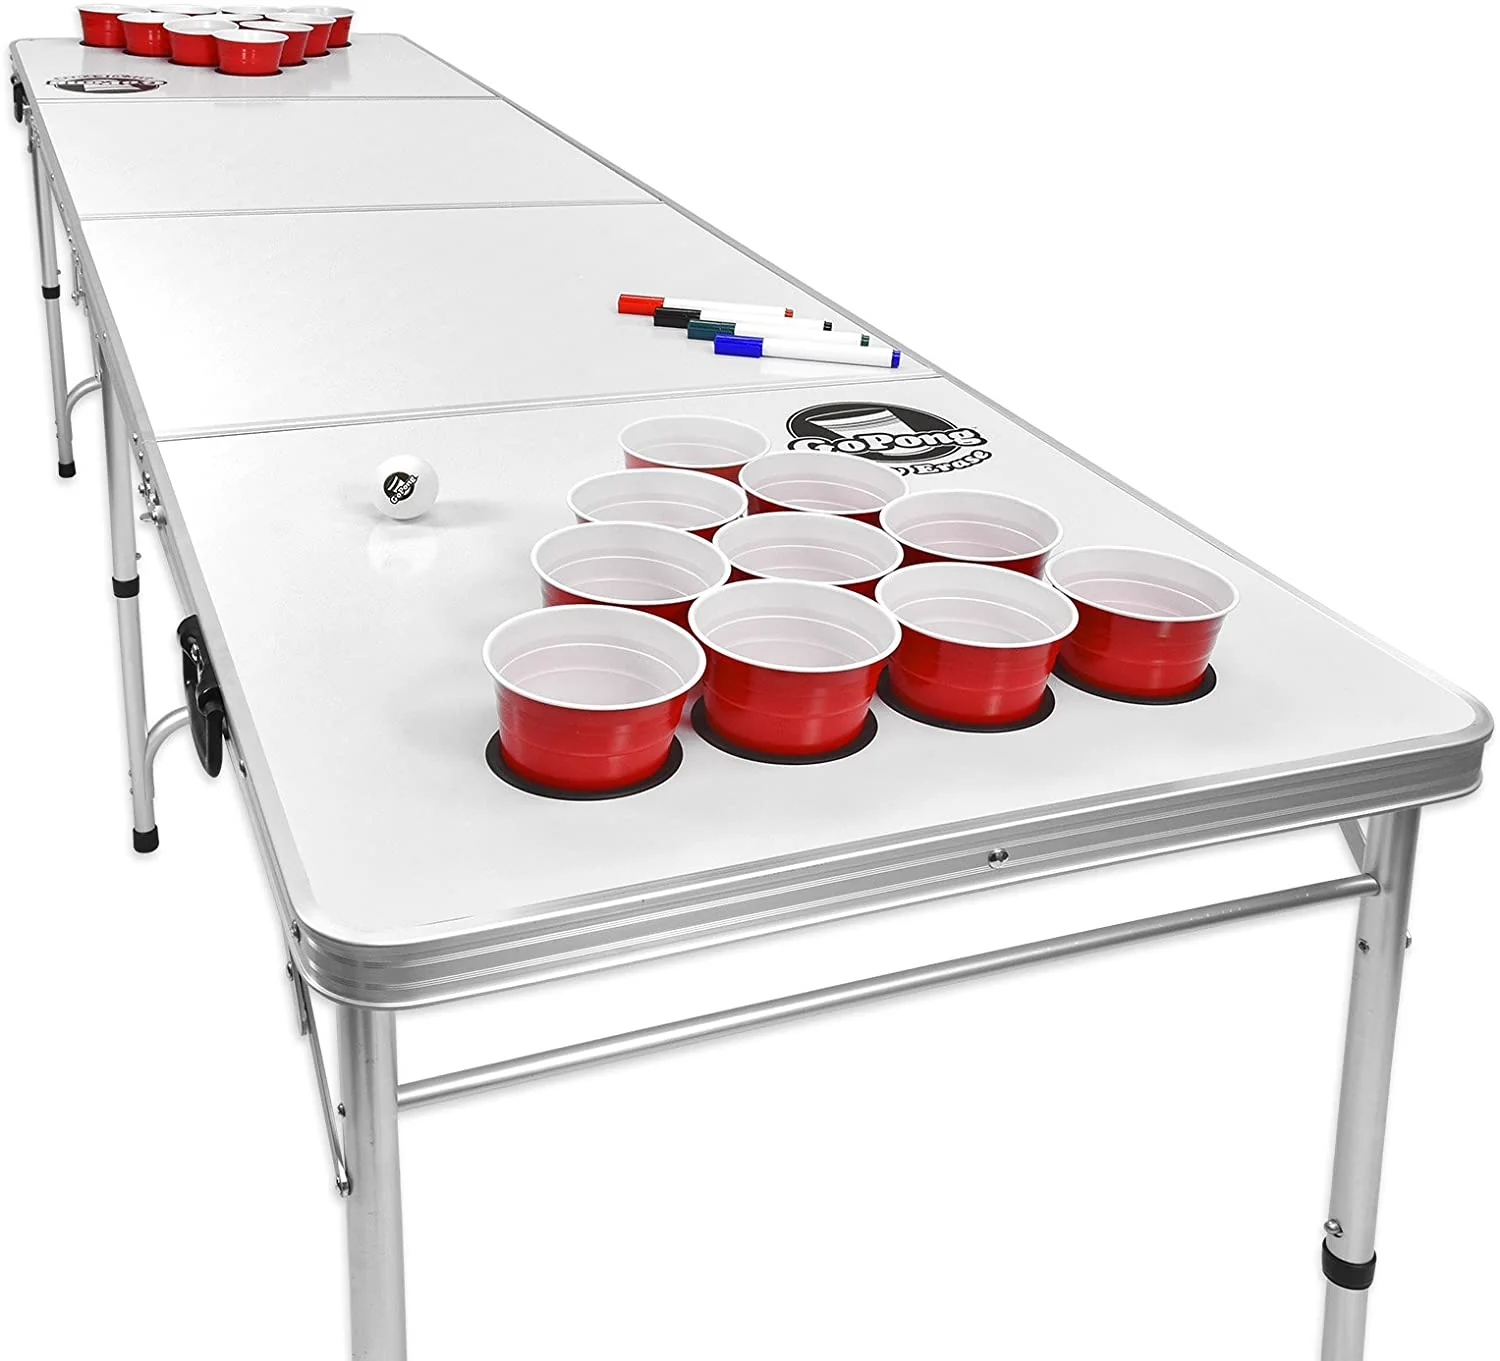 The Art of the Flip: A Guide to Beer Pong Tables插图1